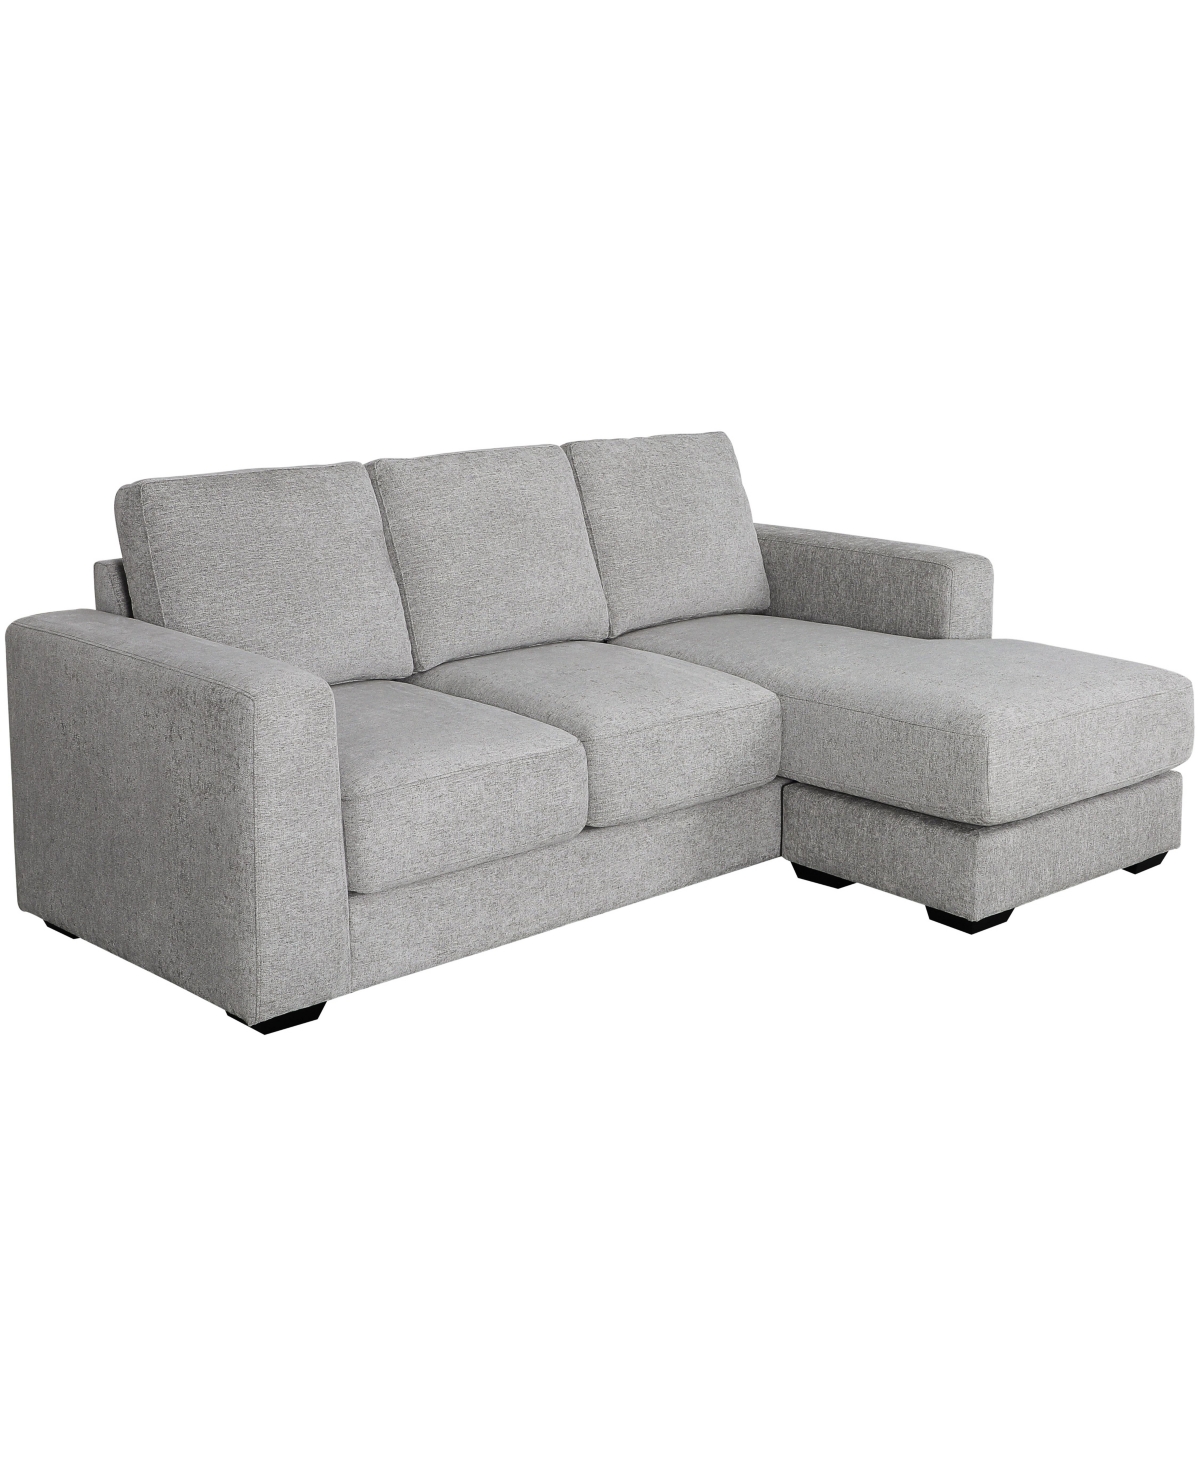 Abbyson Living Elizabeth 85" Stain-resistant Fabric Reversible Sofa Chaise Sectional In Light Gray